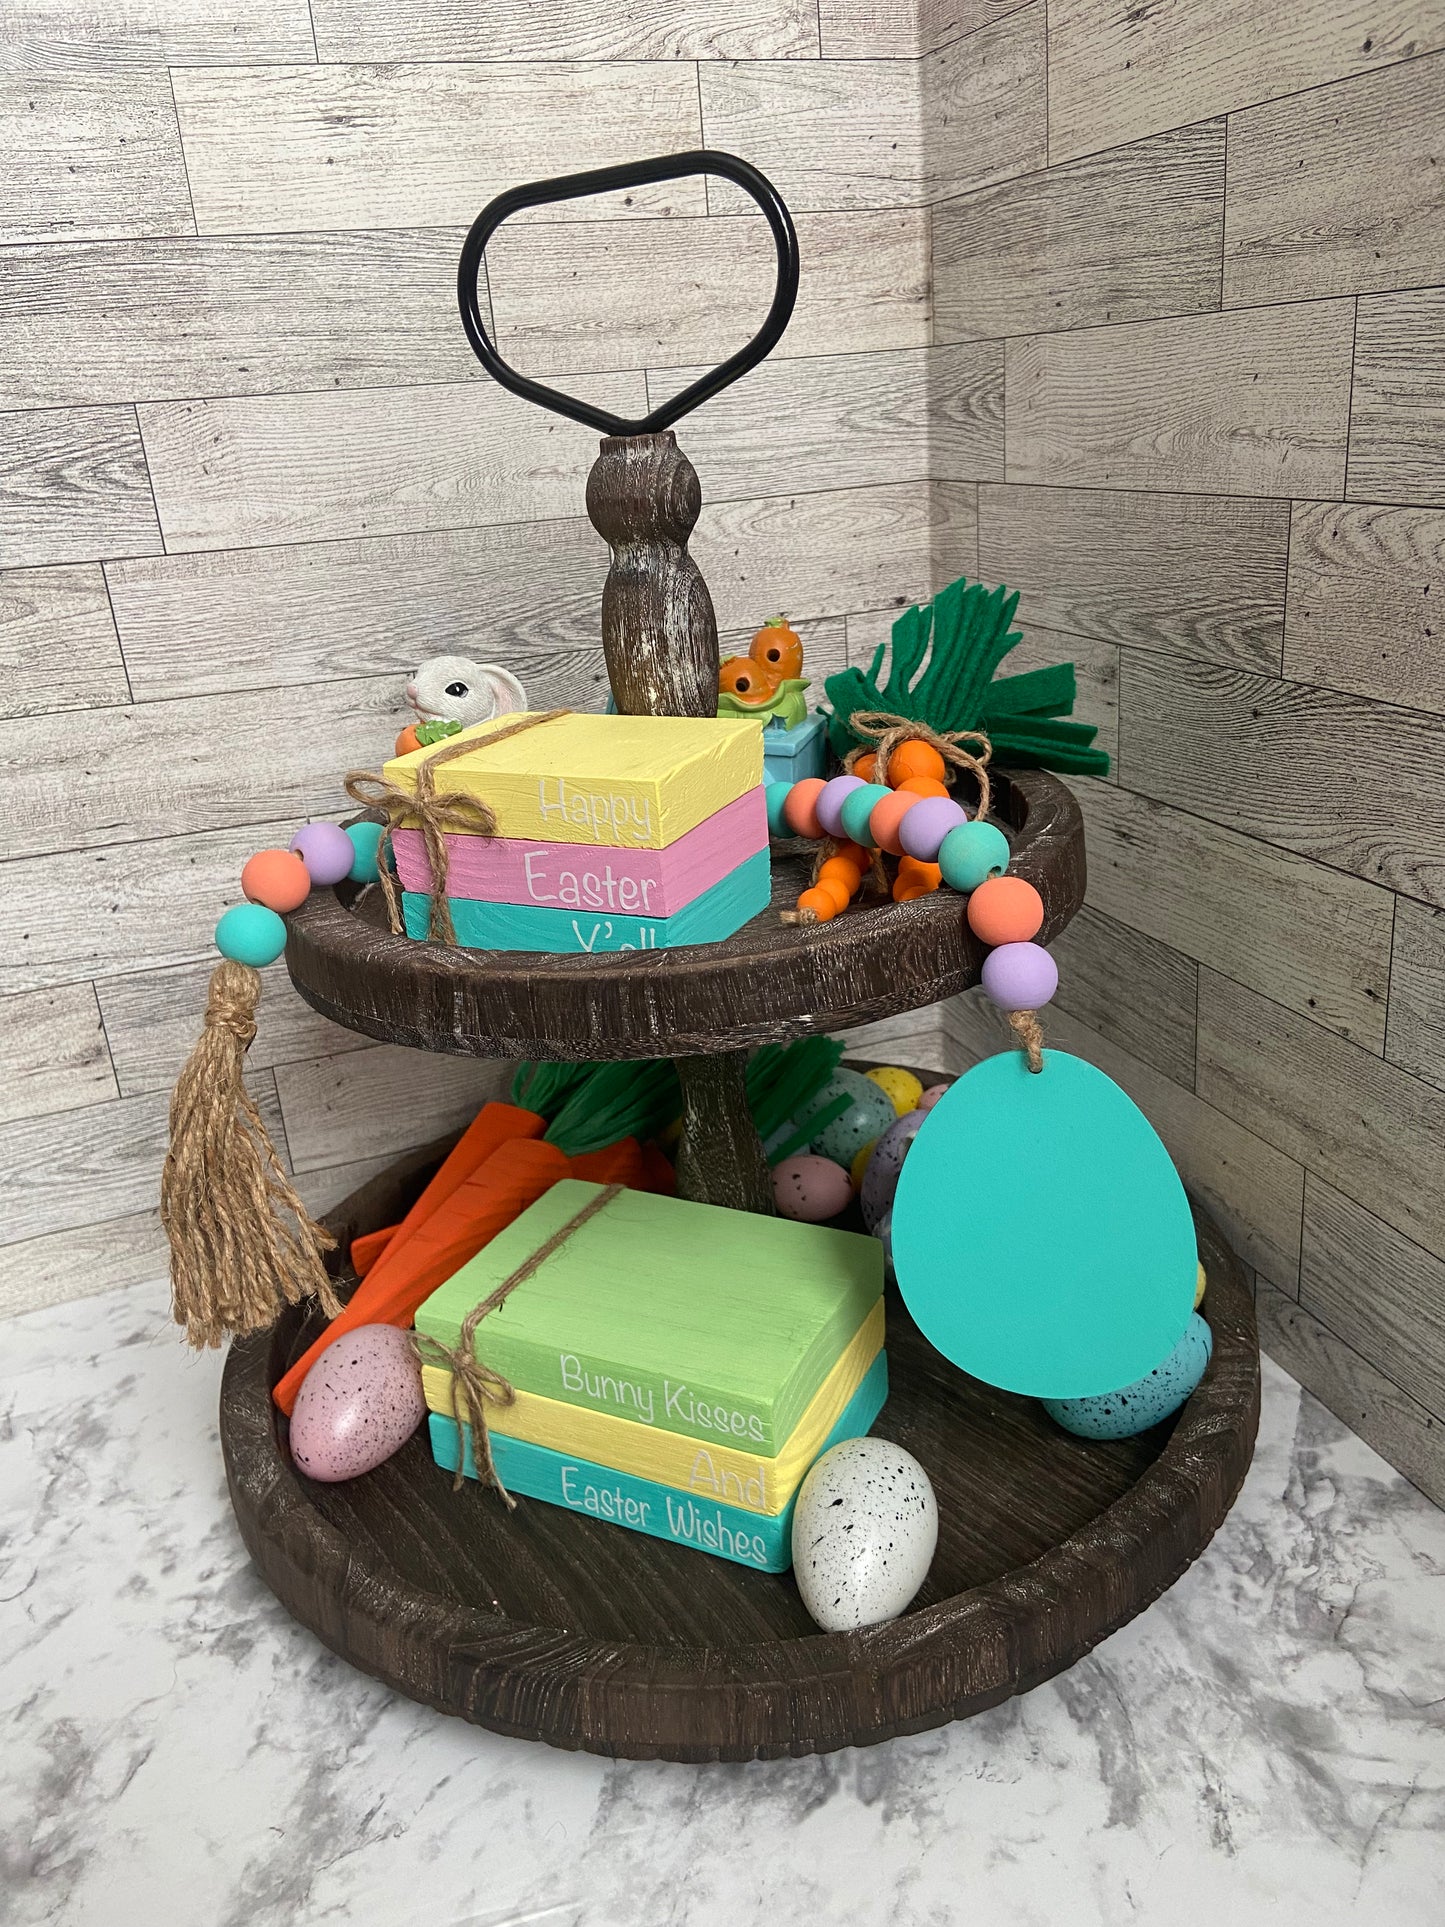 Bunny Kisses And Easter Wishes - Large Book Stack